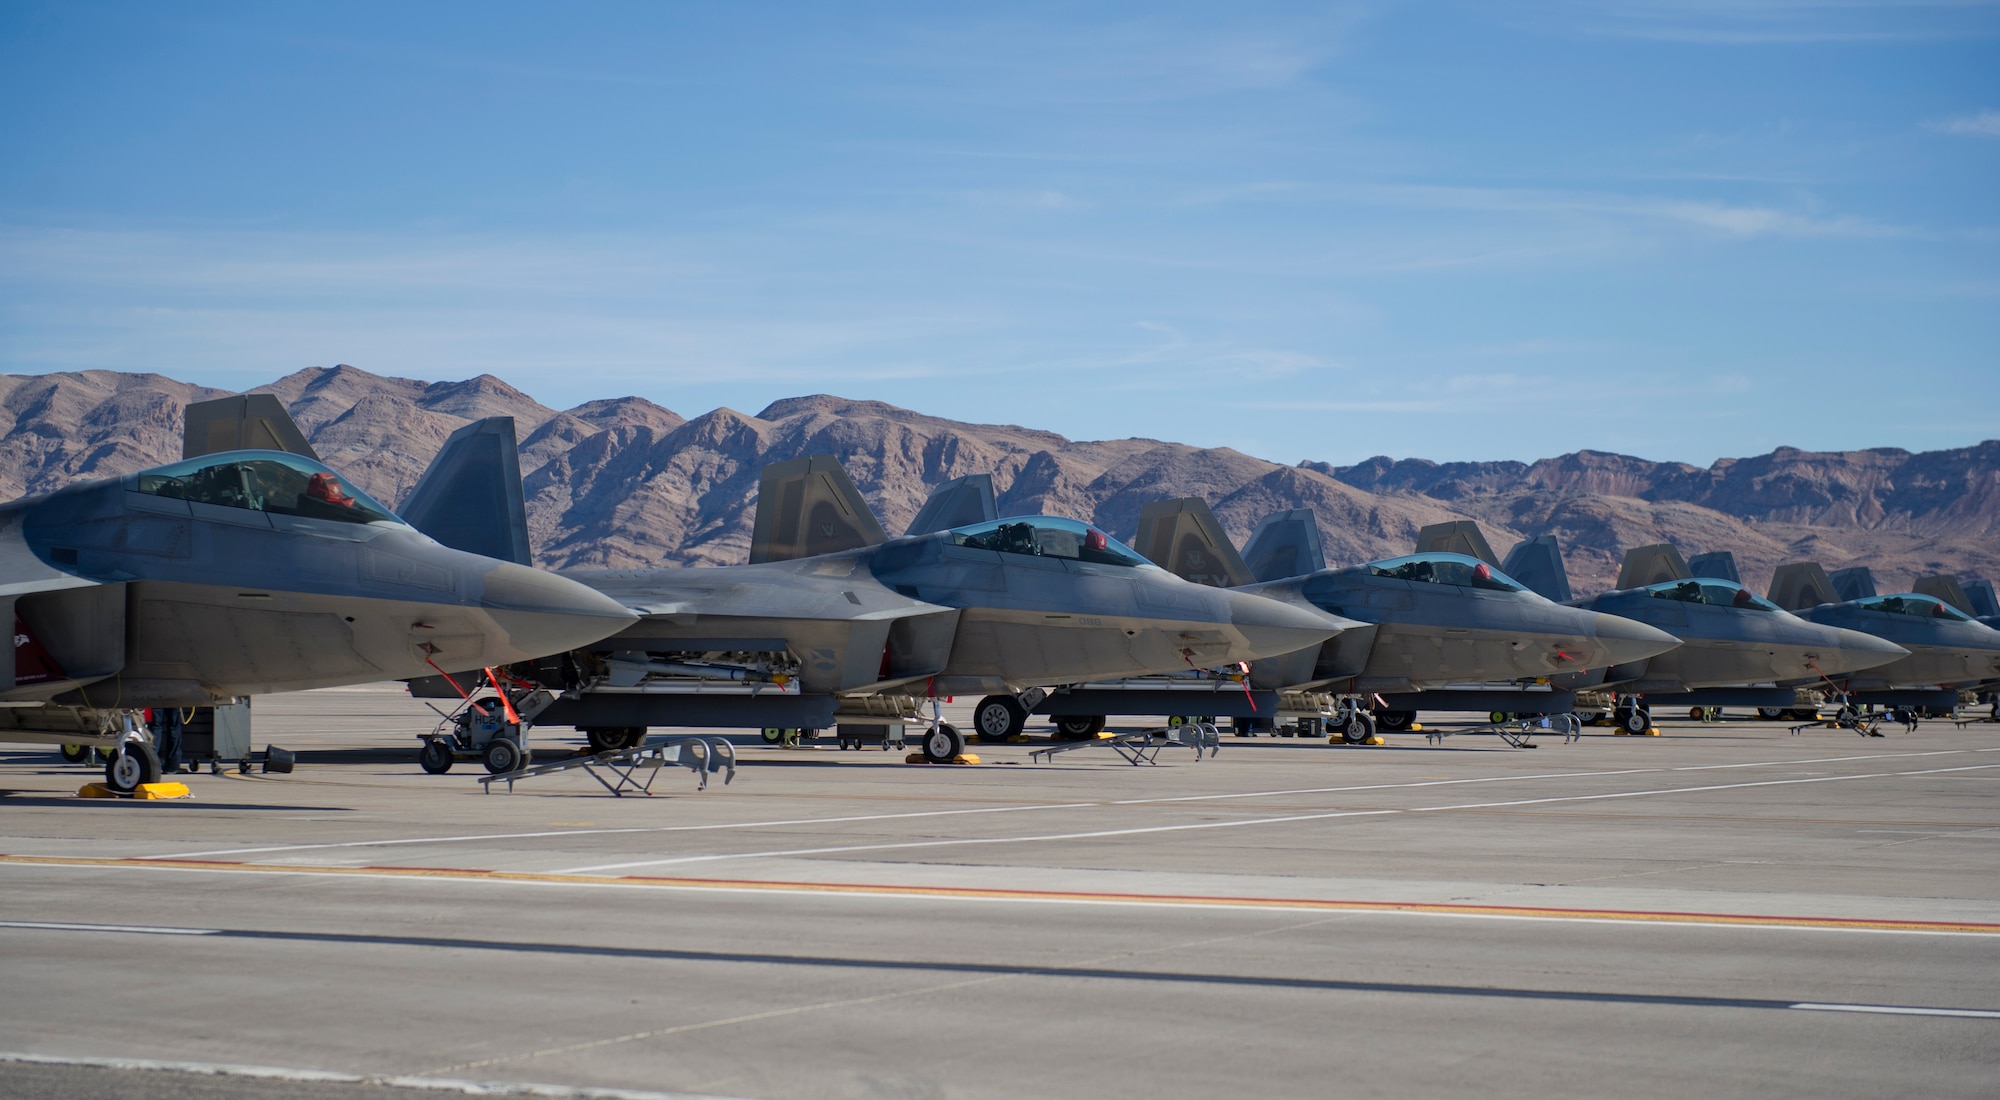 Five F-22 Raptors from Tyndall AFB, Fla. sit on the flightline during the first day of Red Flag 16-1, Jan. 25 at Nellis AFB, Nev. Red Flag is a joint, full-spectrum, readiness exercise designed to provide the most realistic combat training available. (U.S. Air Force photo by Senior Airman Alex Fox Echols III/Released)  